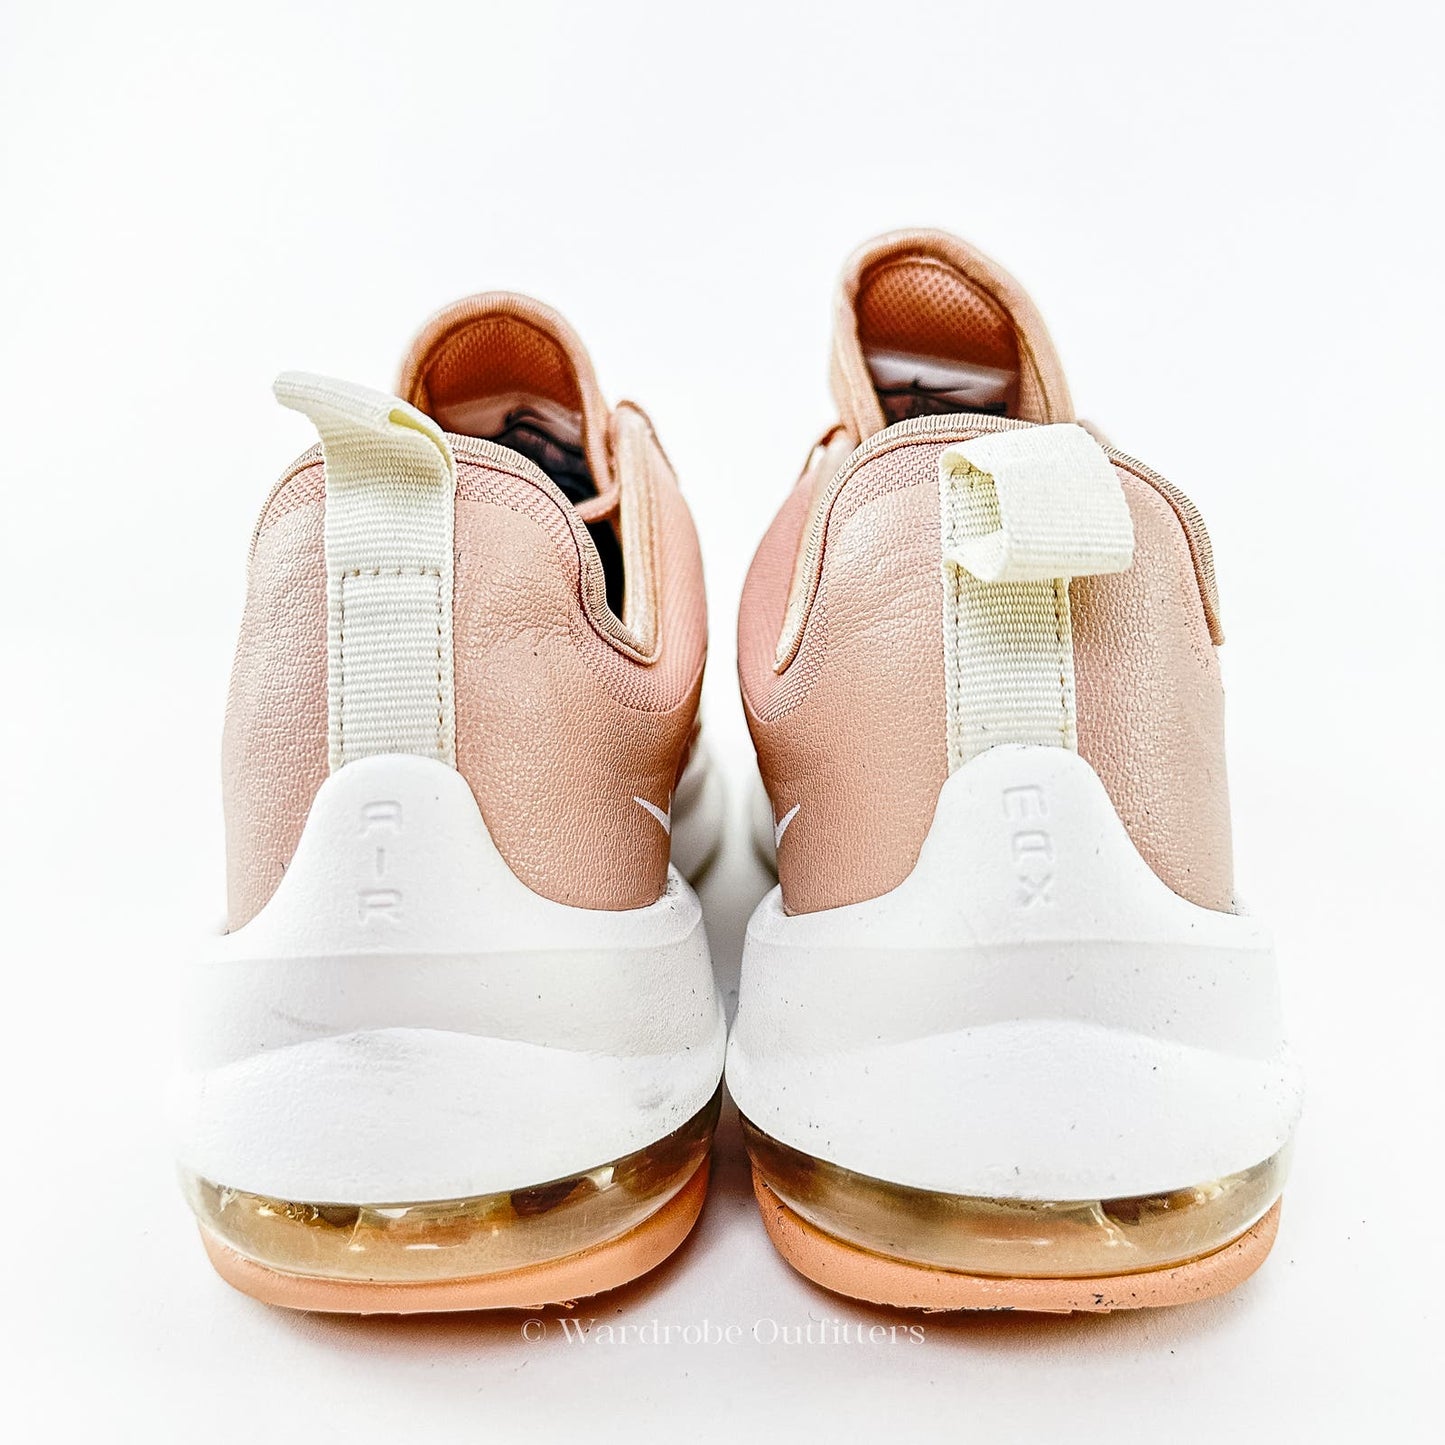 Nike Air Max Axis 'Particle Beige' Sneakers - 8